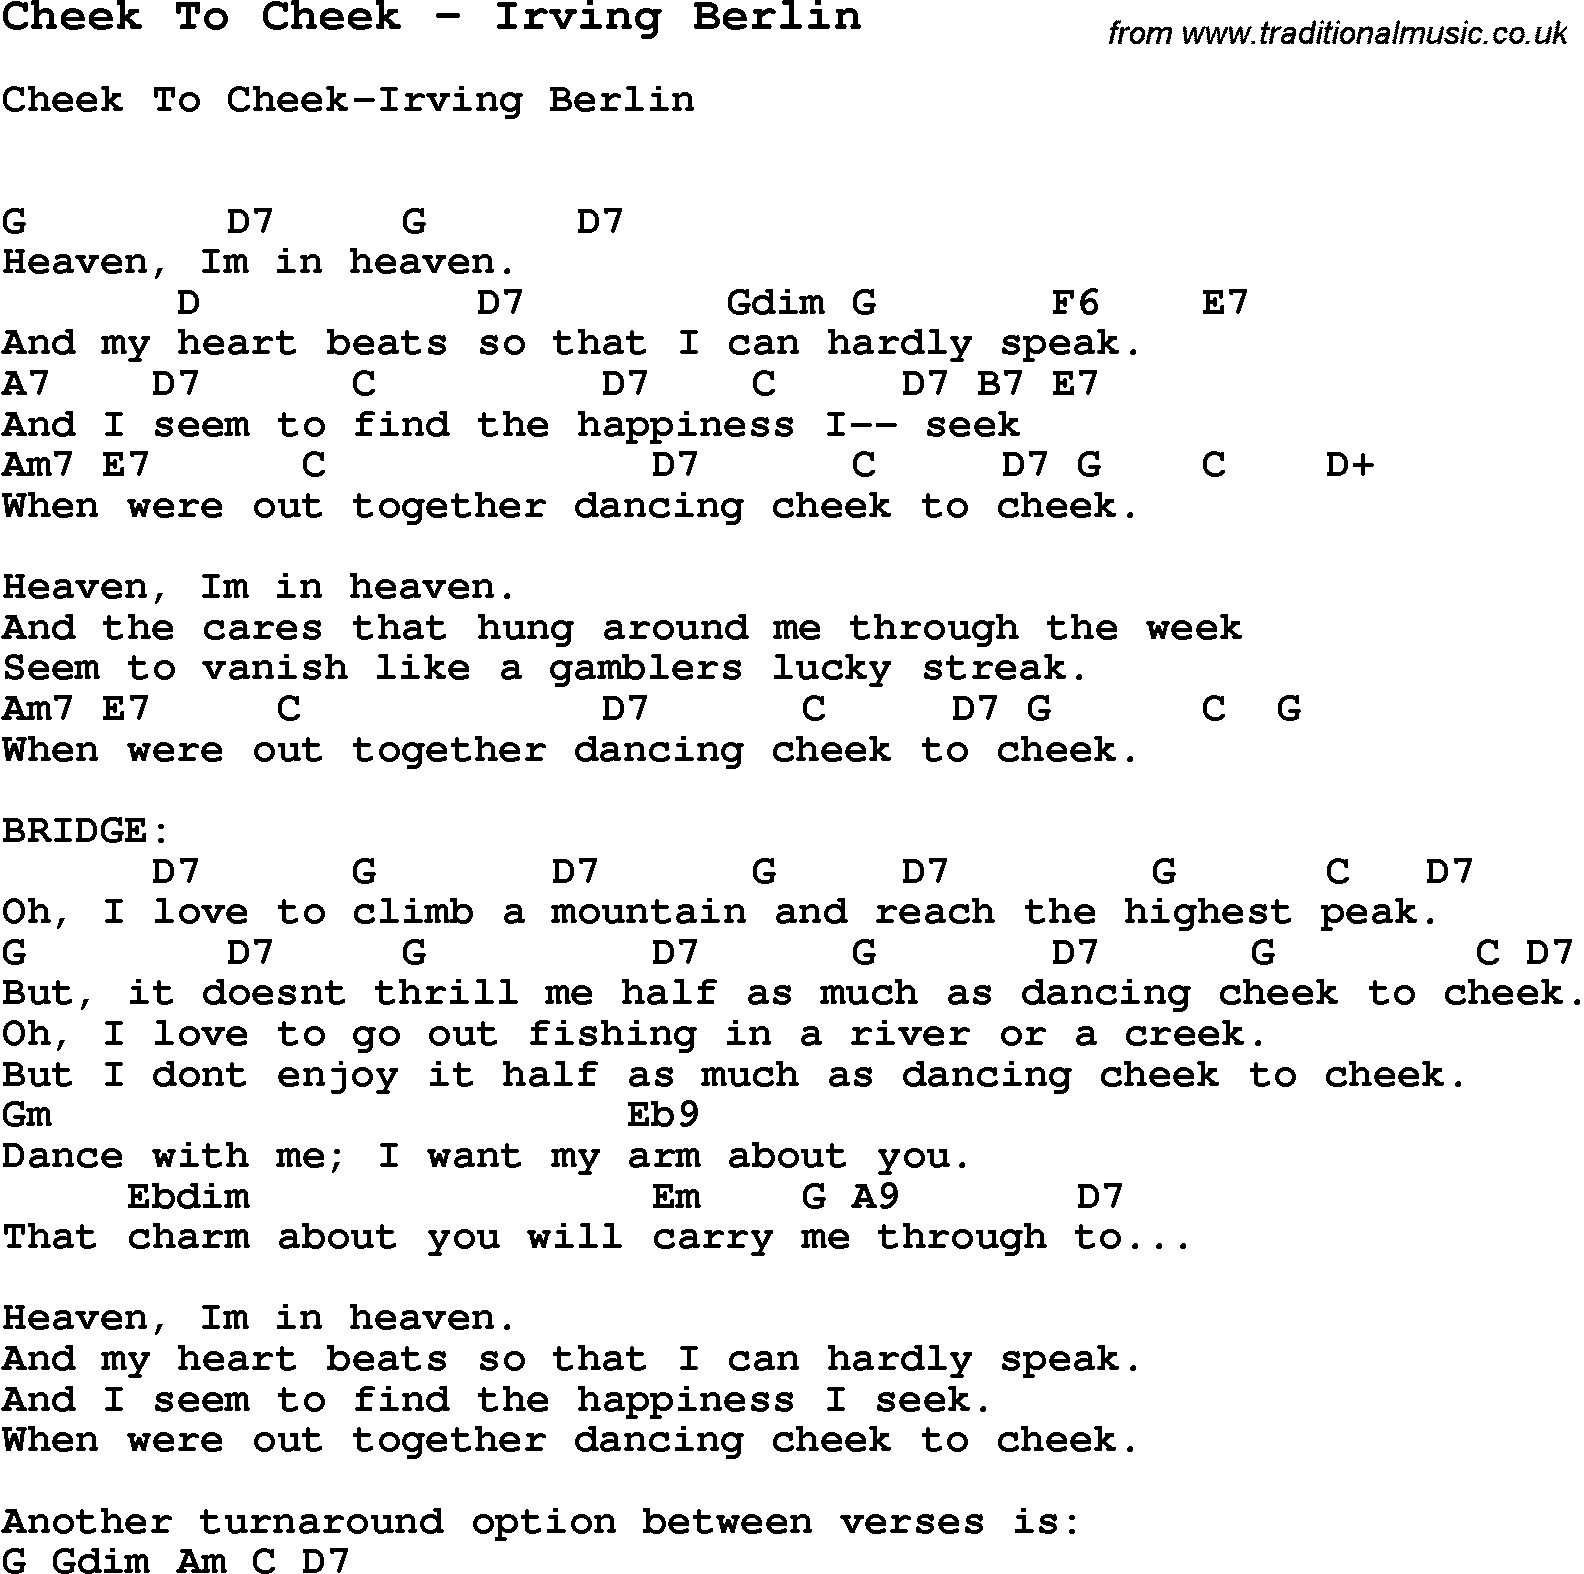 Song Cheek To Cheek by Irving Berlin, with lyrics for vocal performance and accompaniment chords for Ukulele, Guitar Banjo etc.